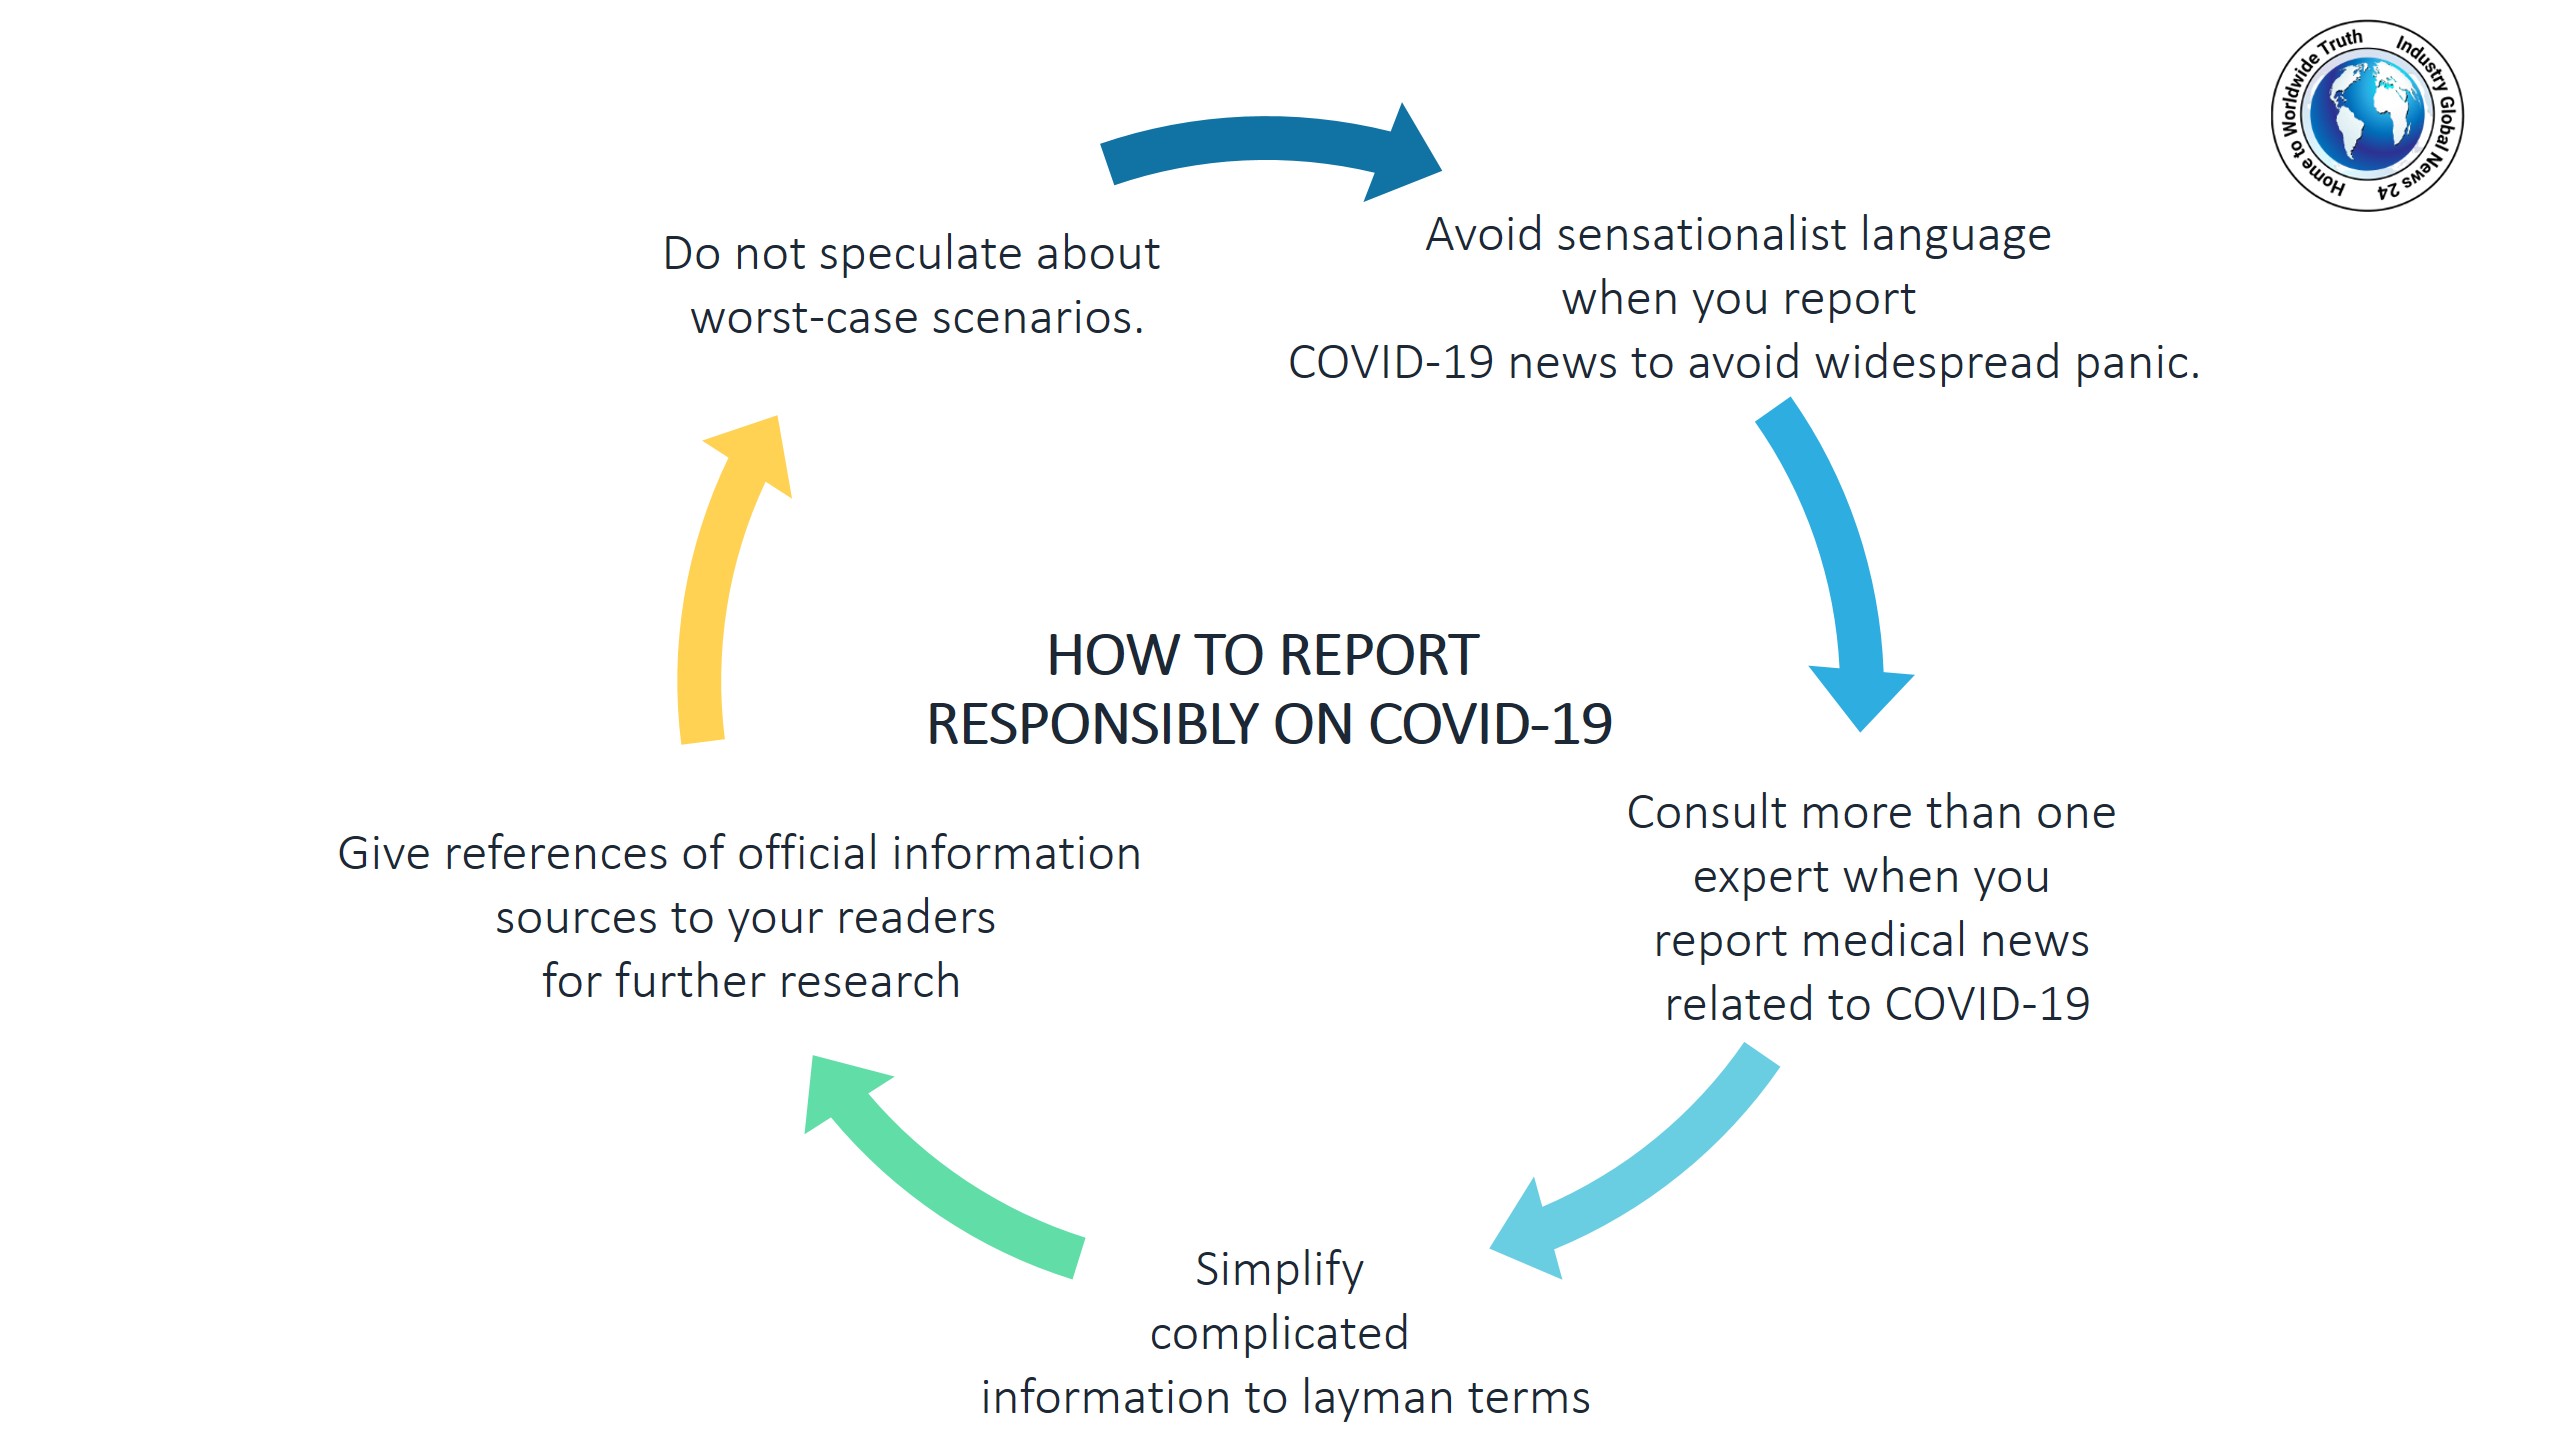 How to report responsibly on COVID-19